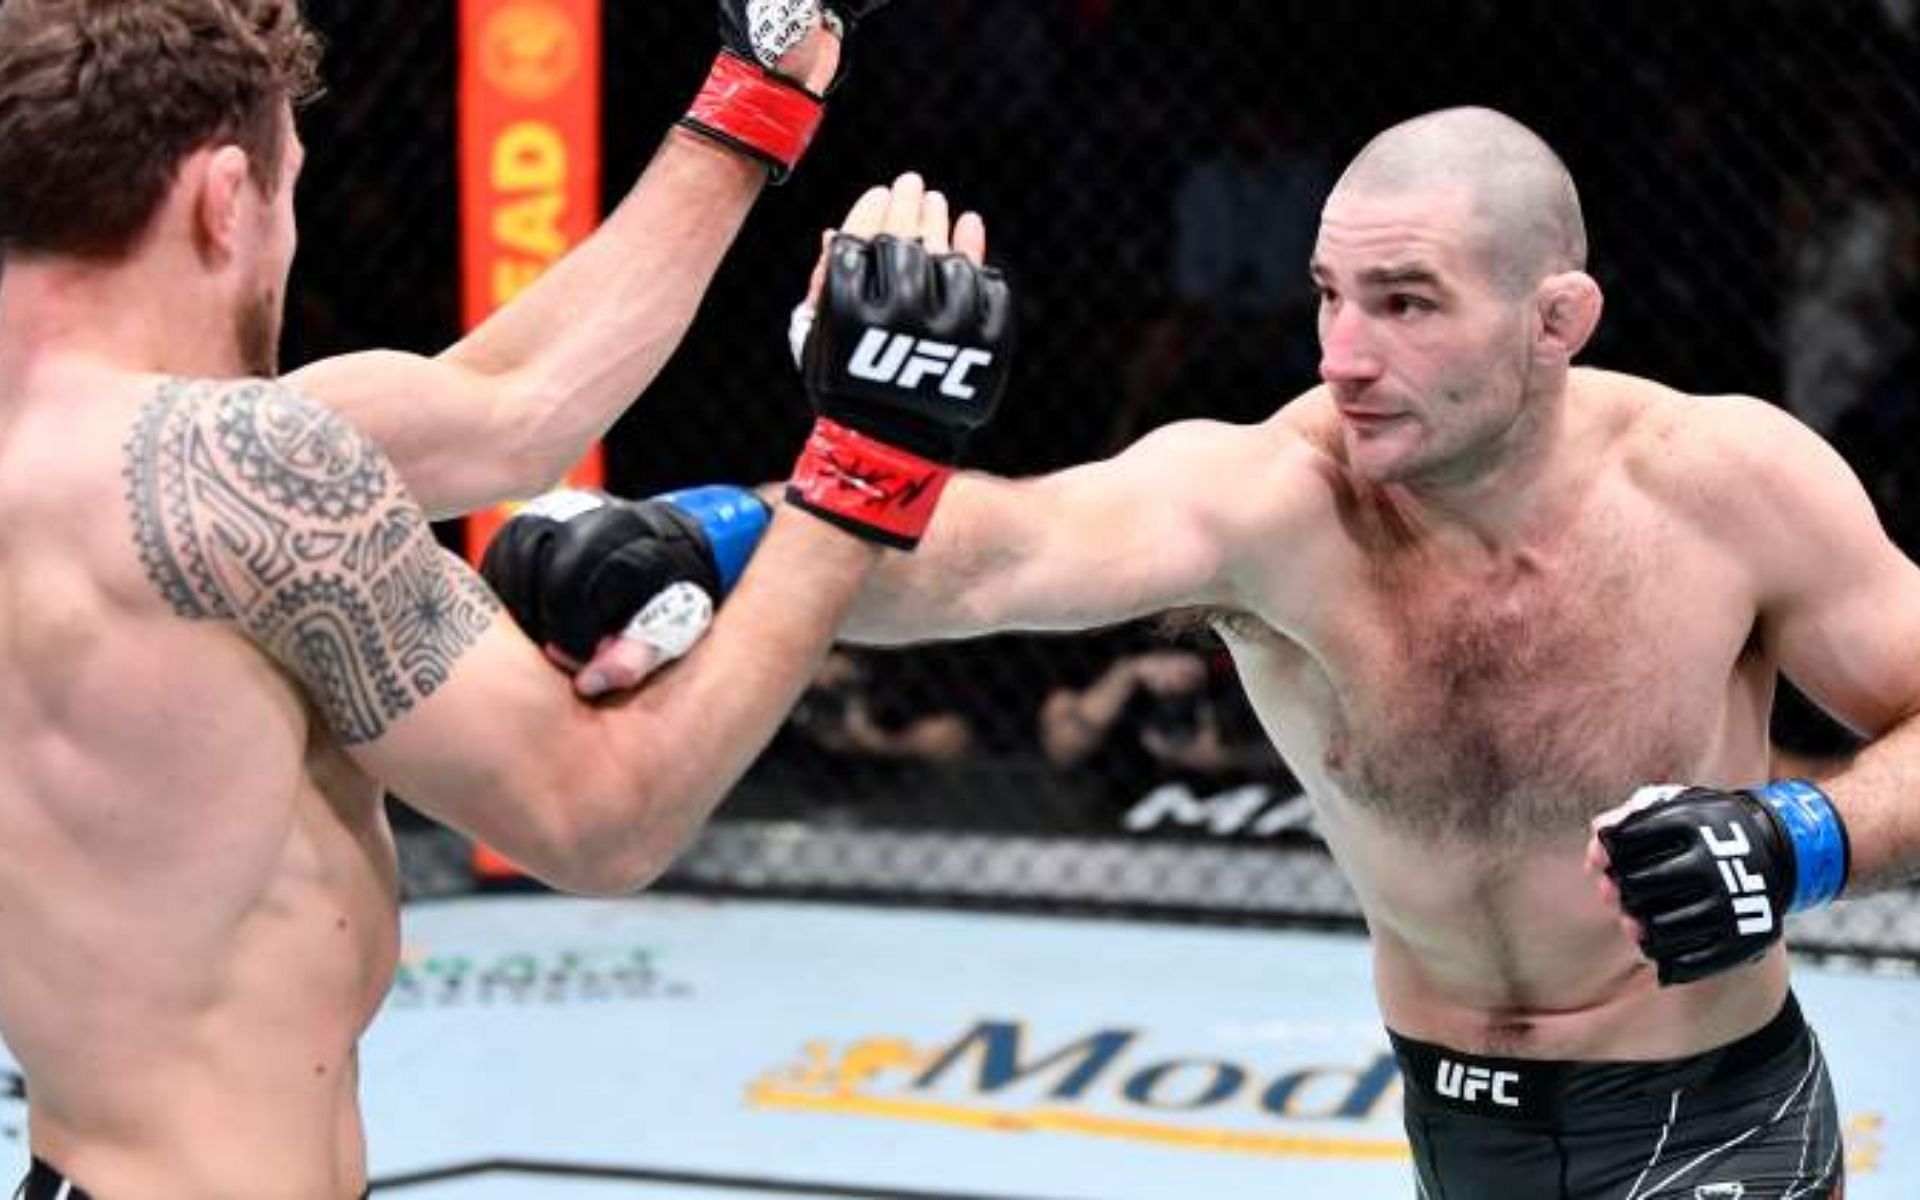 Sean Strickland edged closer to a title shot with his win over Jack Hermansson